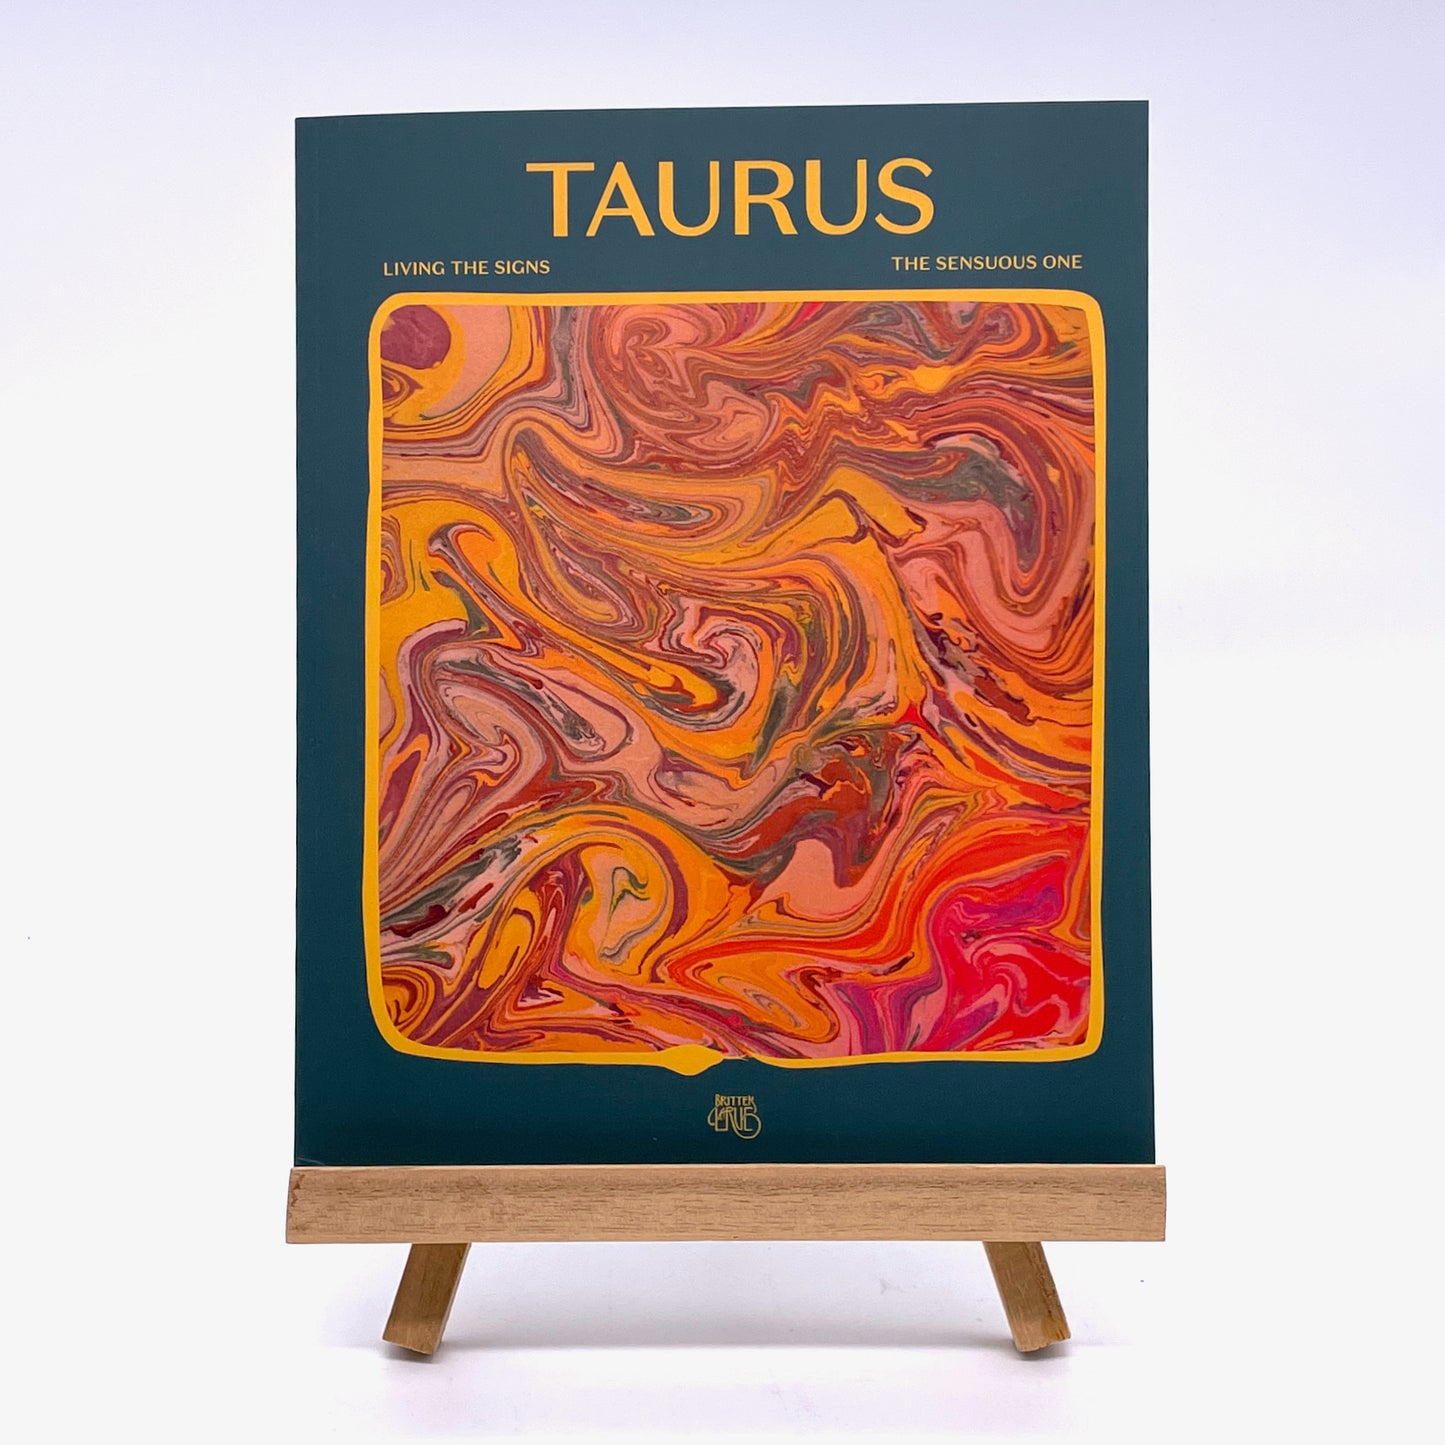 Living the Signs: Taurus